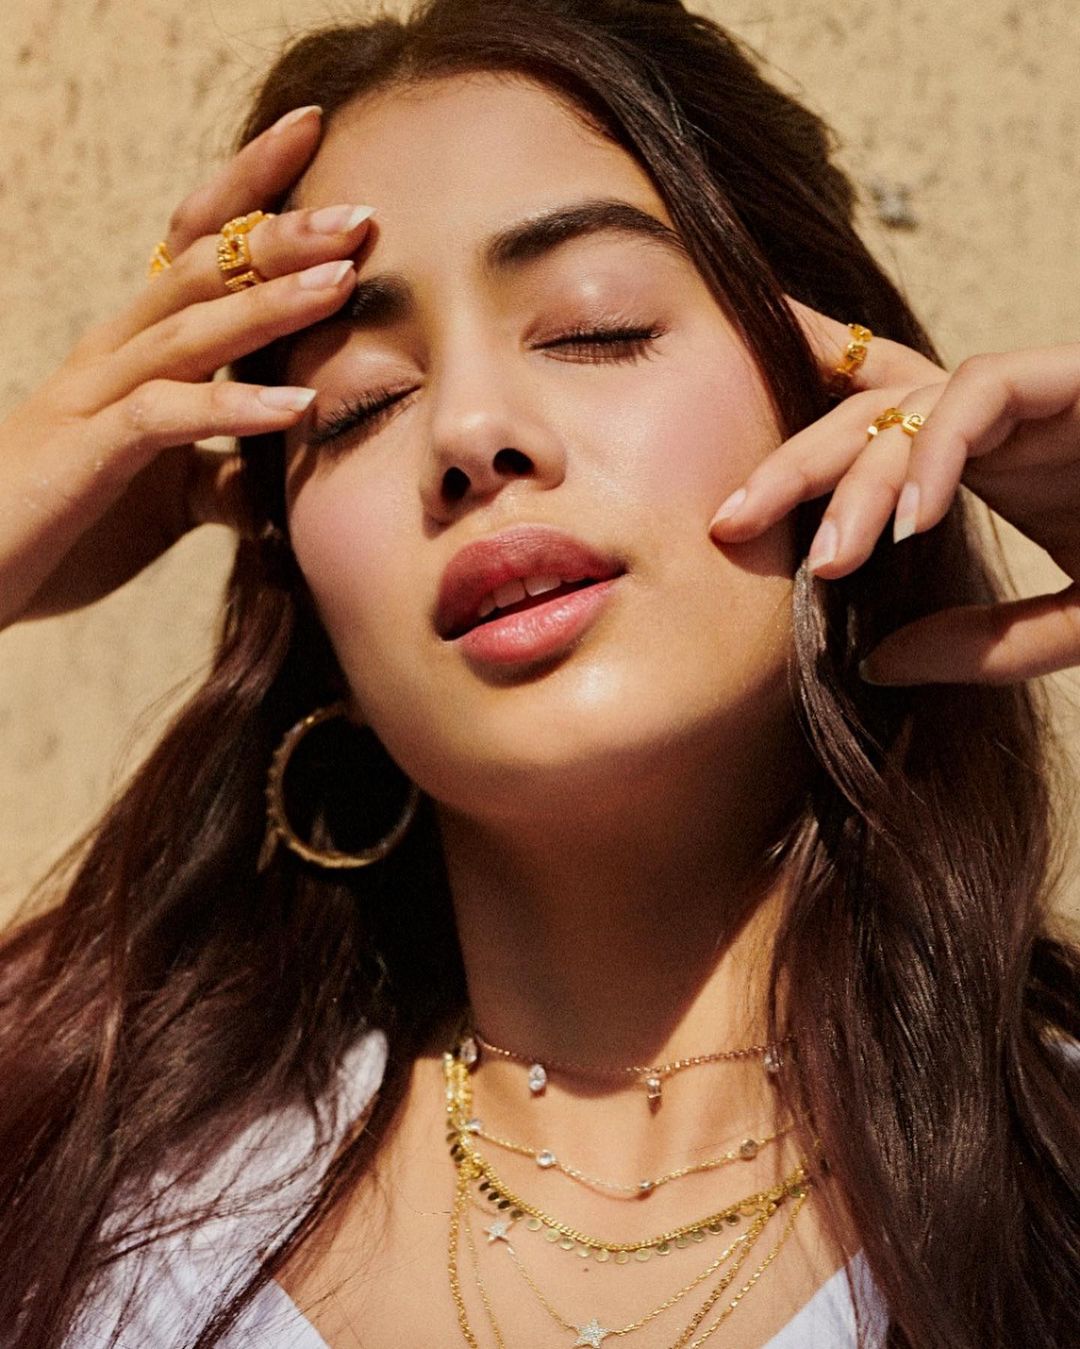  Janhvi Kapoor goes for the au naturel look with just a hint of colour on her lips. (Image: Instagram)